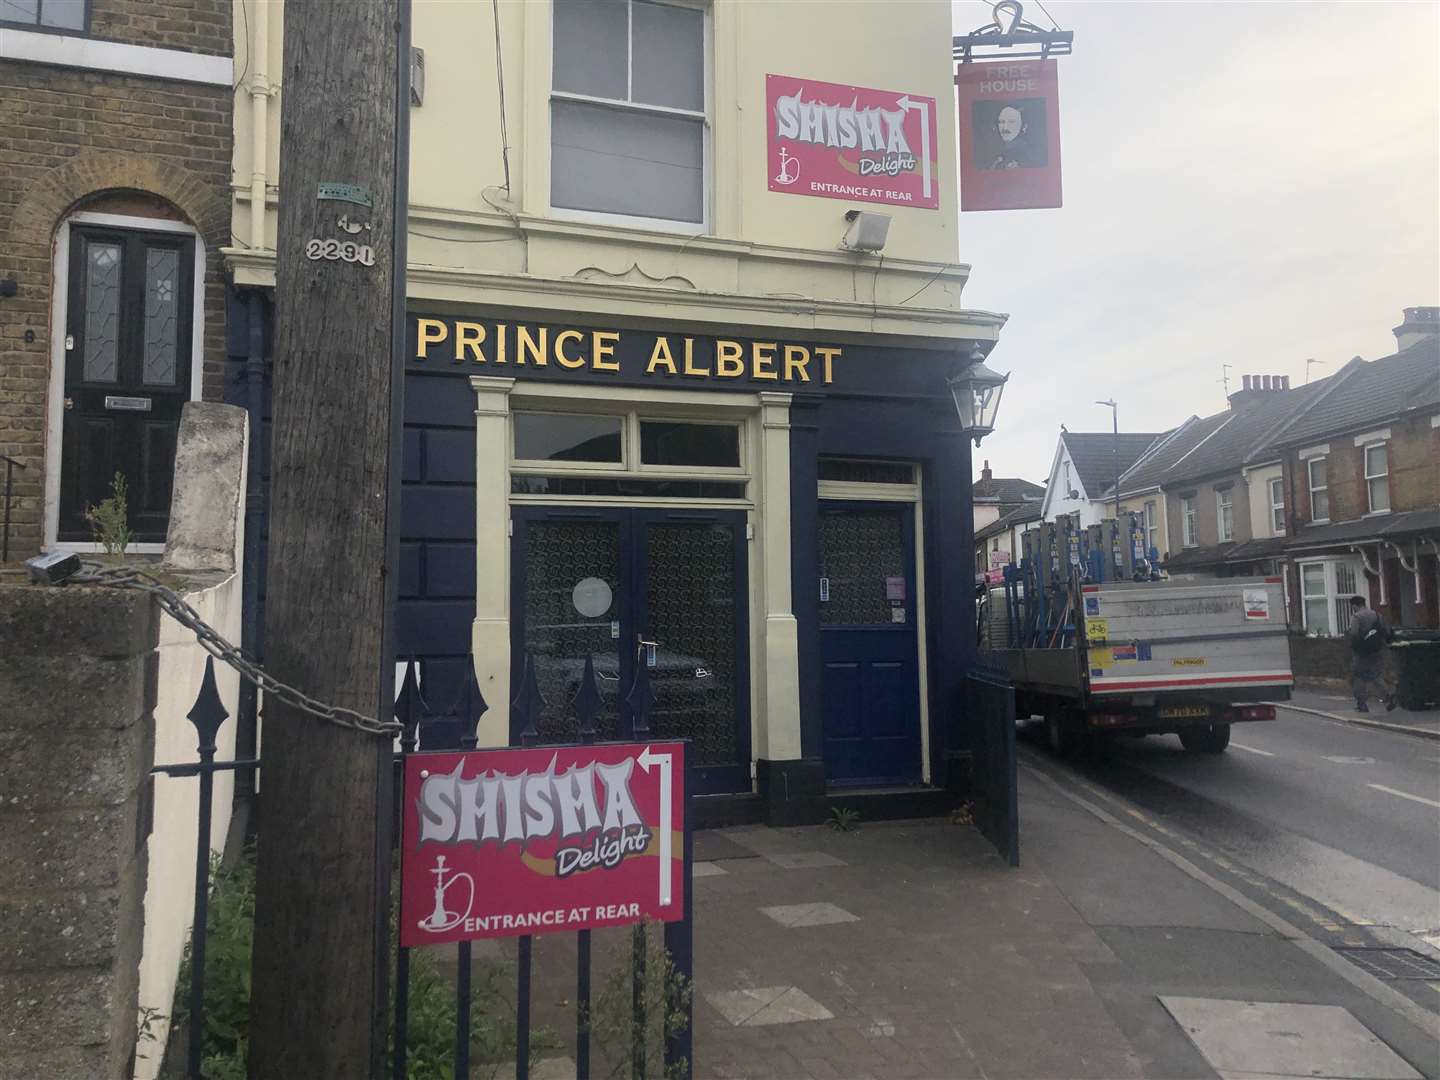 The Prince Albert pub in Wrotham Road, Gravesend, with Shisha Delight signs